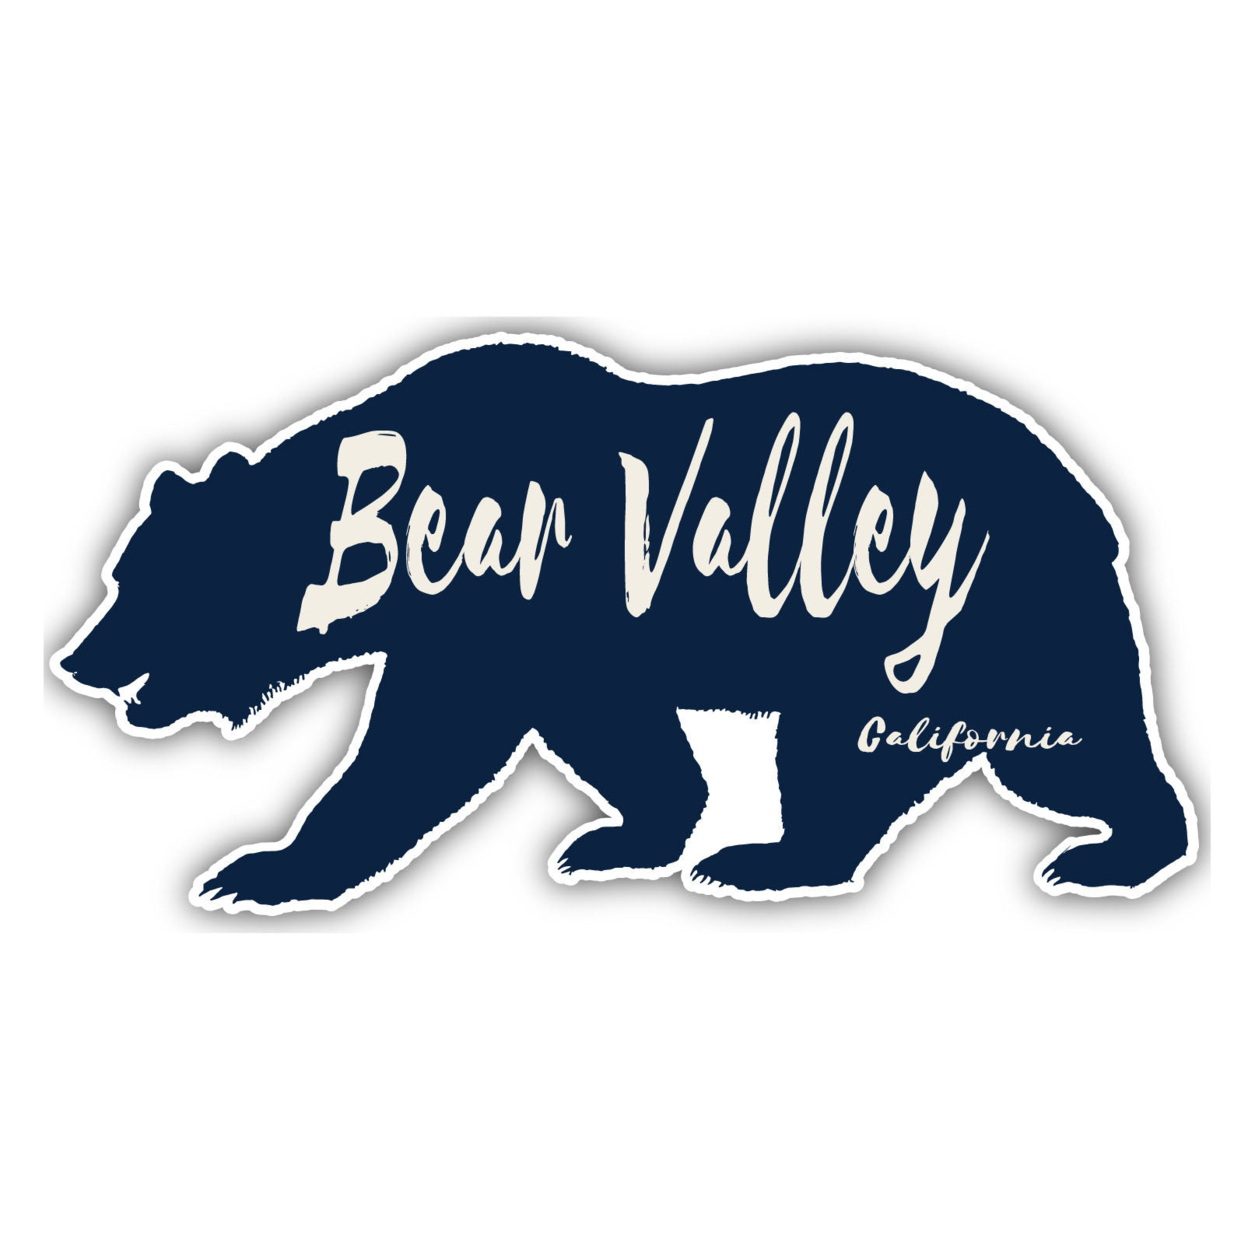 Bear Valley California Souvenir Decorative Stickers (Choose Theme And Size) - 4-Pack, 10-Inch, Bear